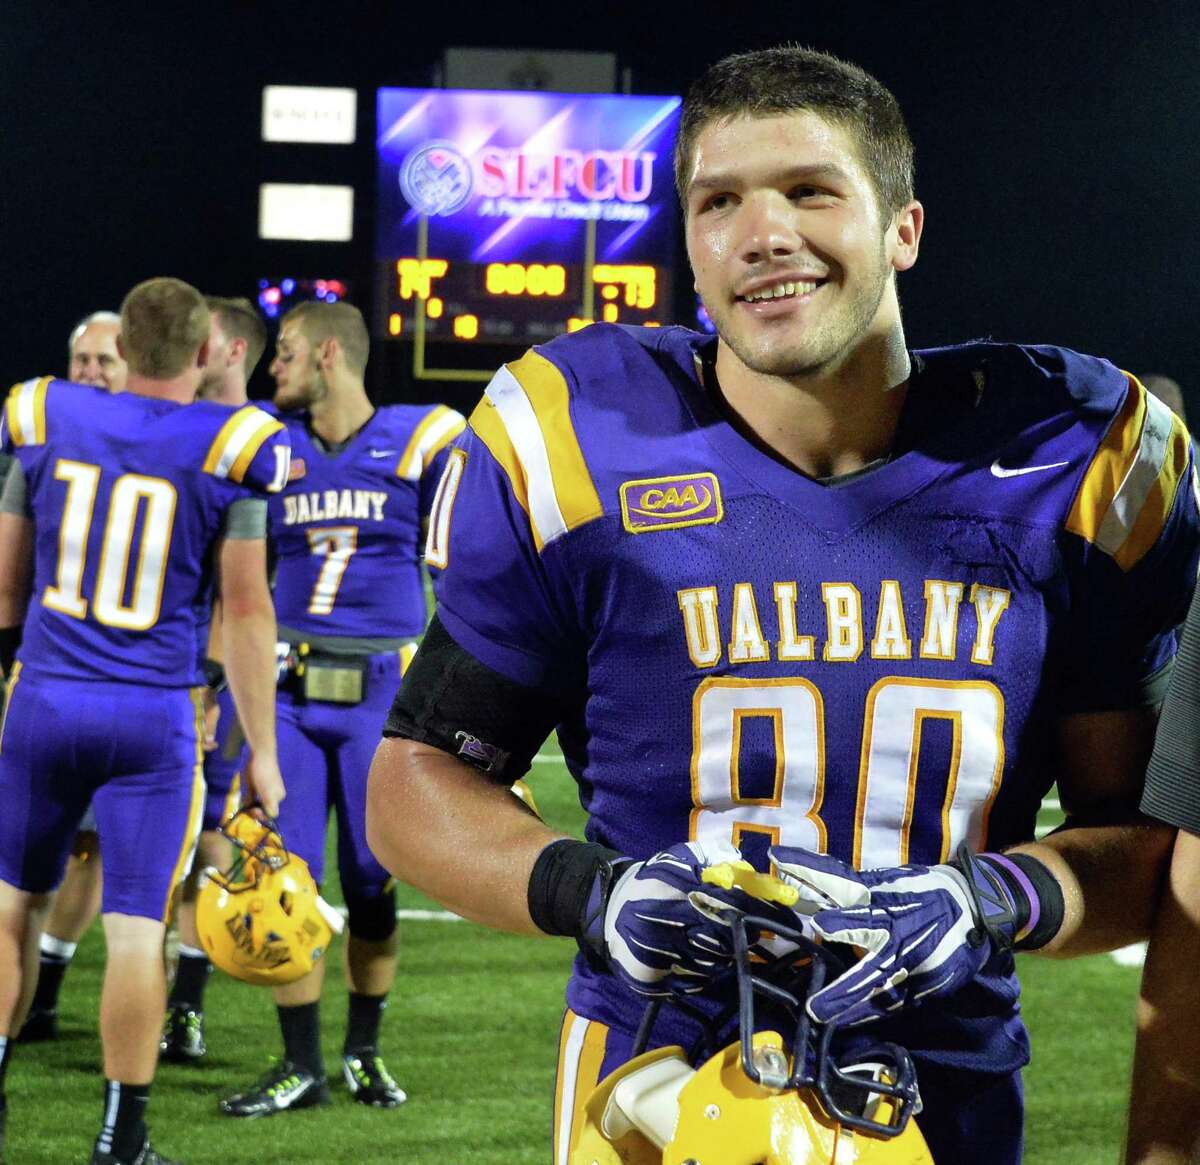 UAlbany's #80 Brian Parker is all smiles as he leaves the field after Saturday's season opener win against Holy Cross at Bob Ford Field in Albany, NY. (John Carl D'Annibale / Times Union)